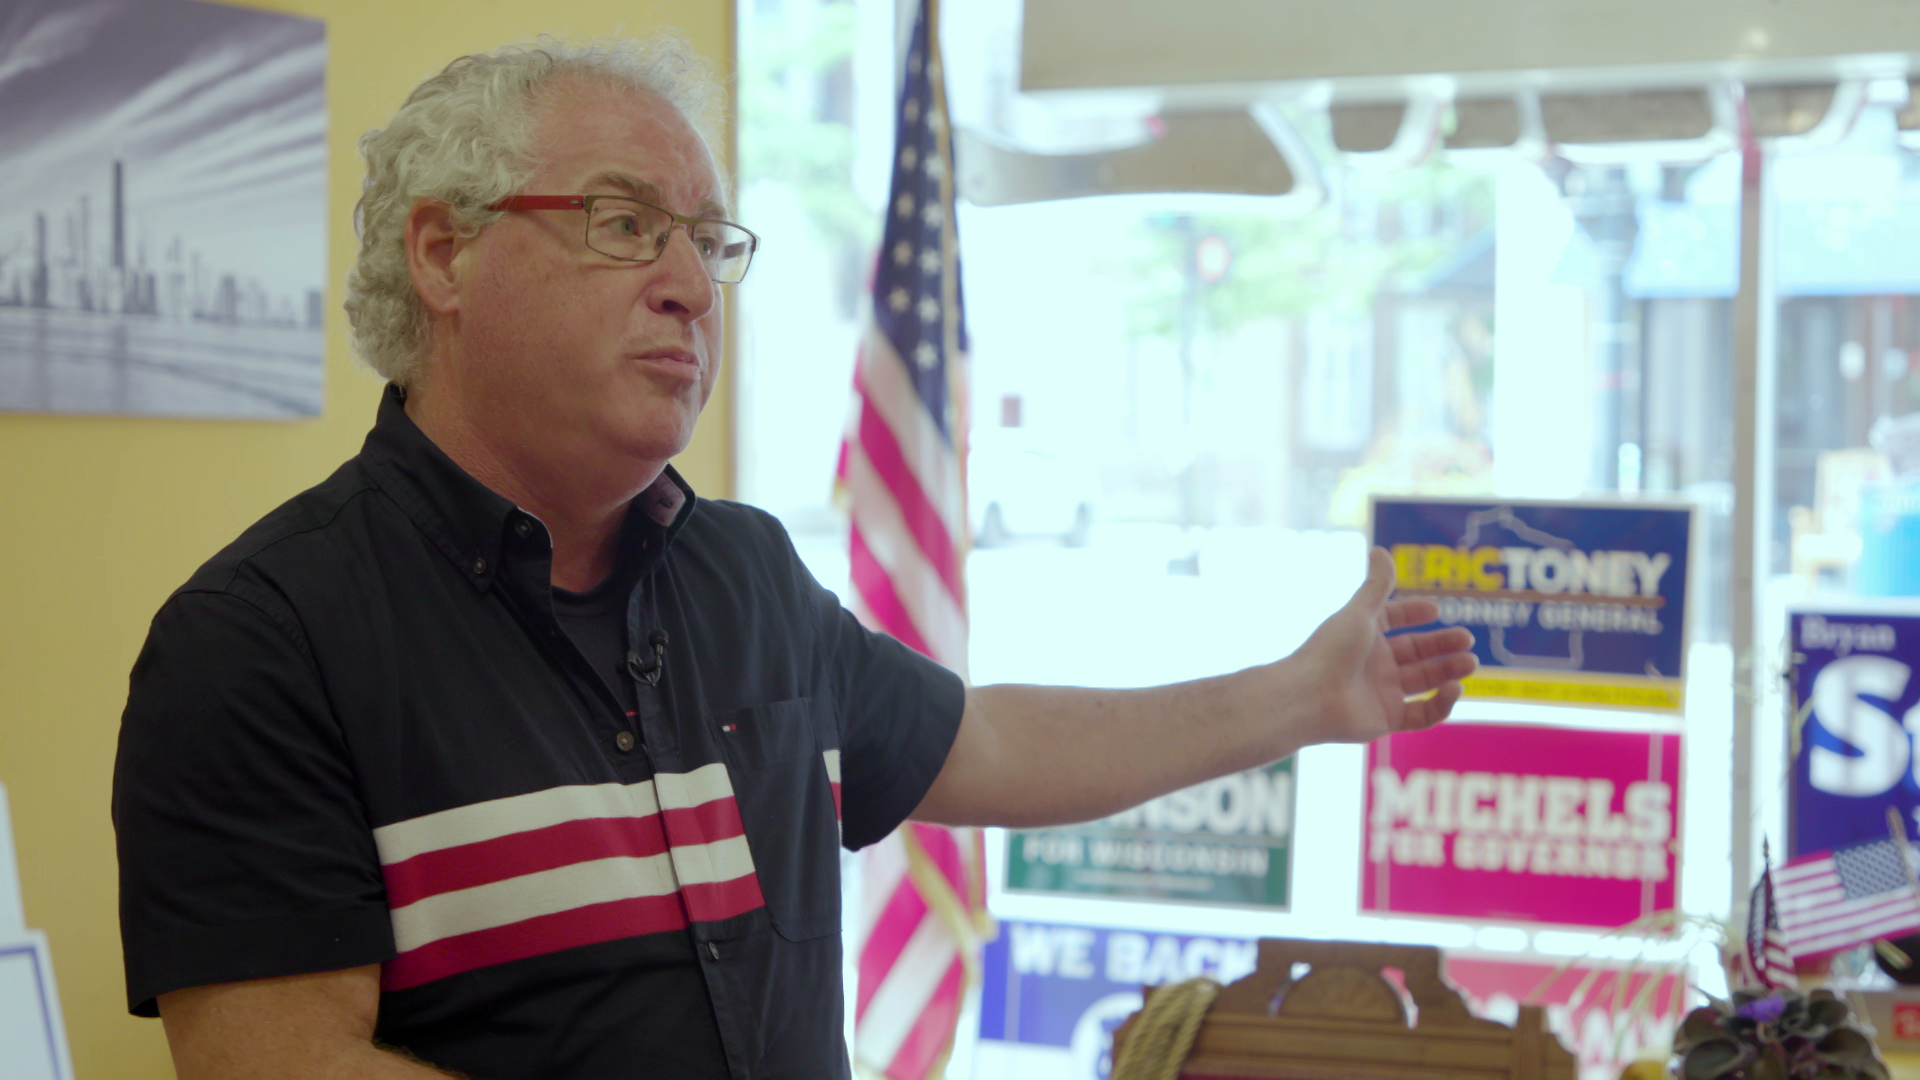 Ken Brown stands in an office and gestures with his left hand with a U.S. flag and political yard signs displayed in a window in the background.